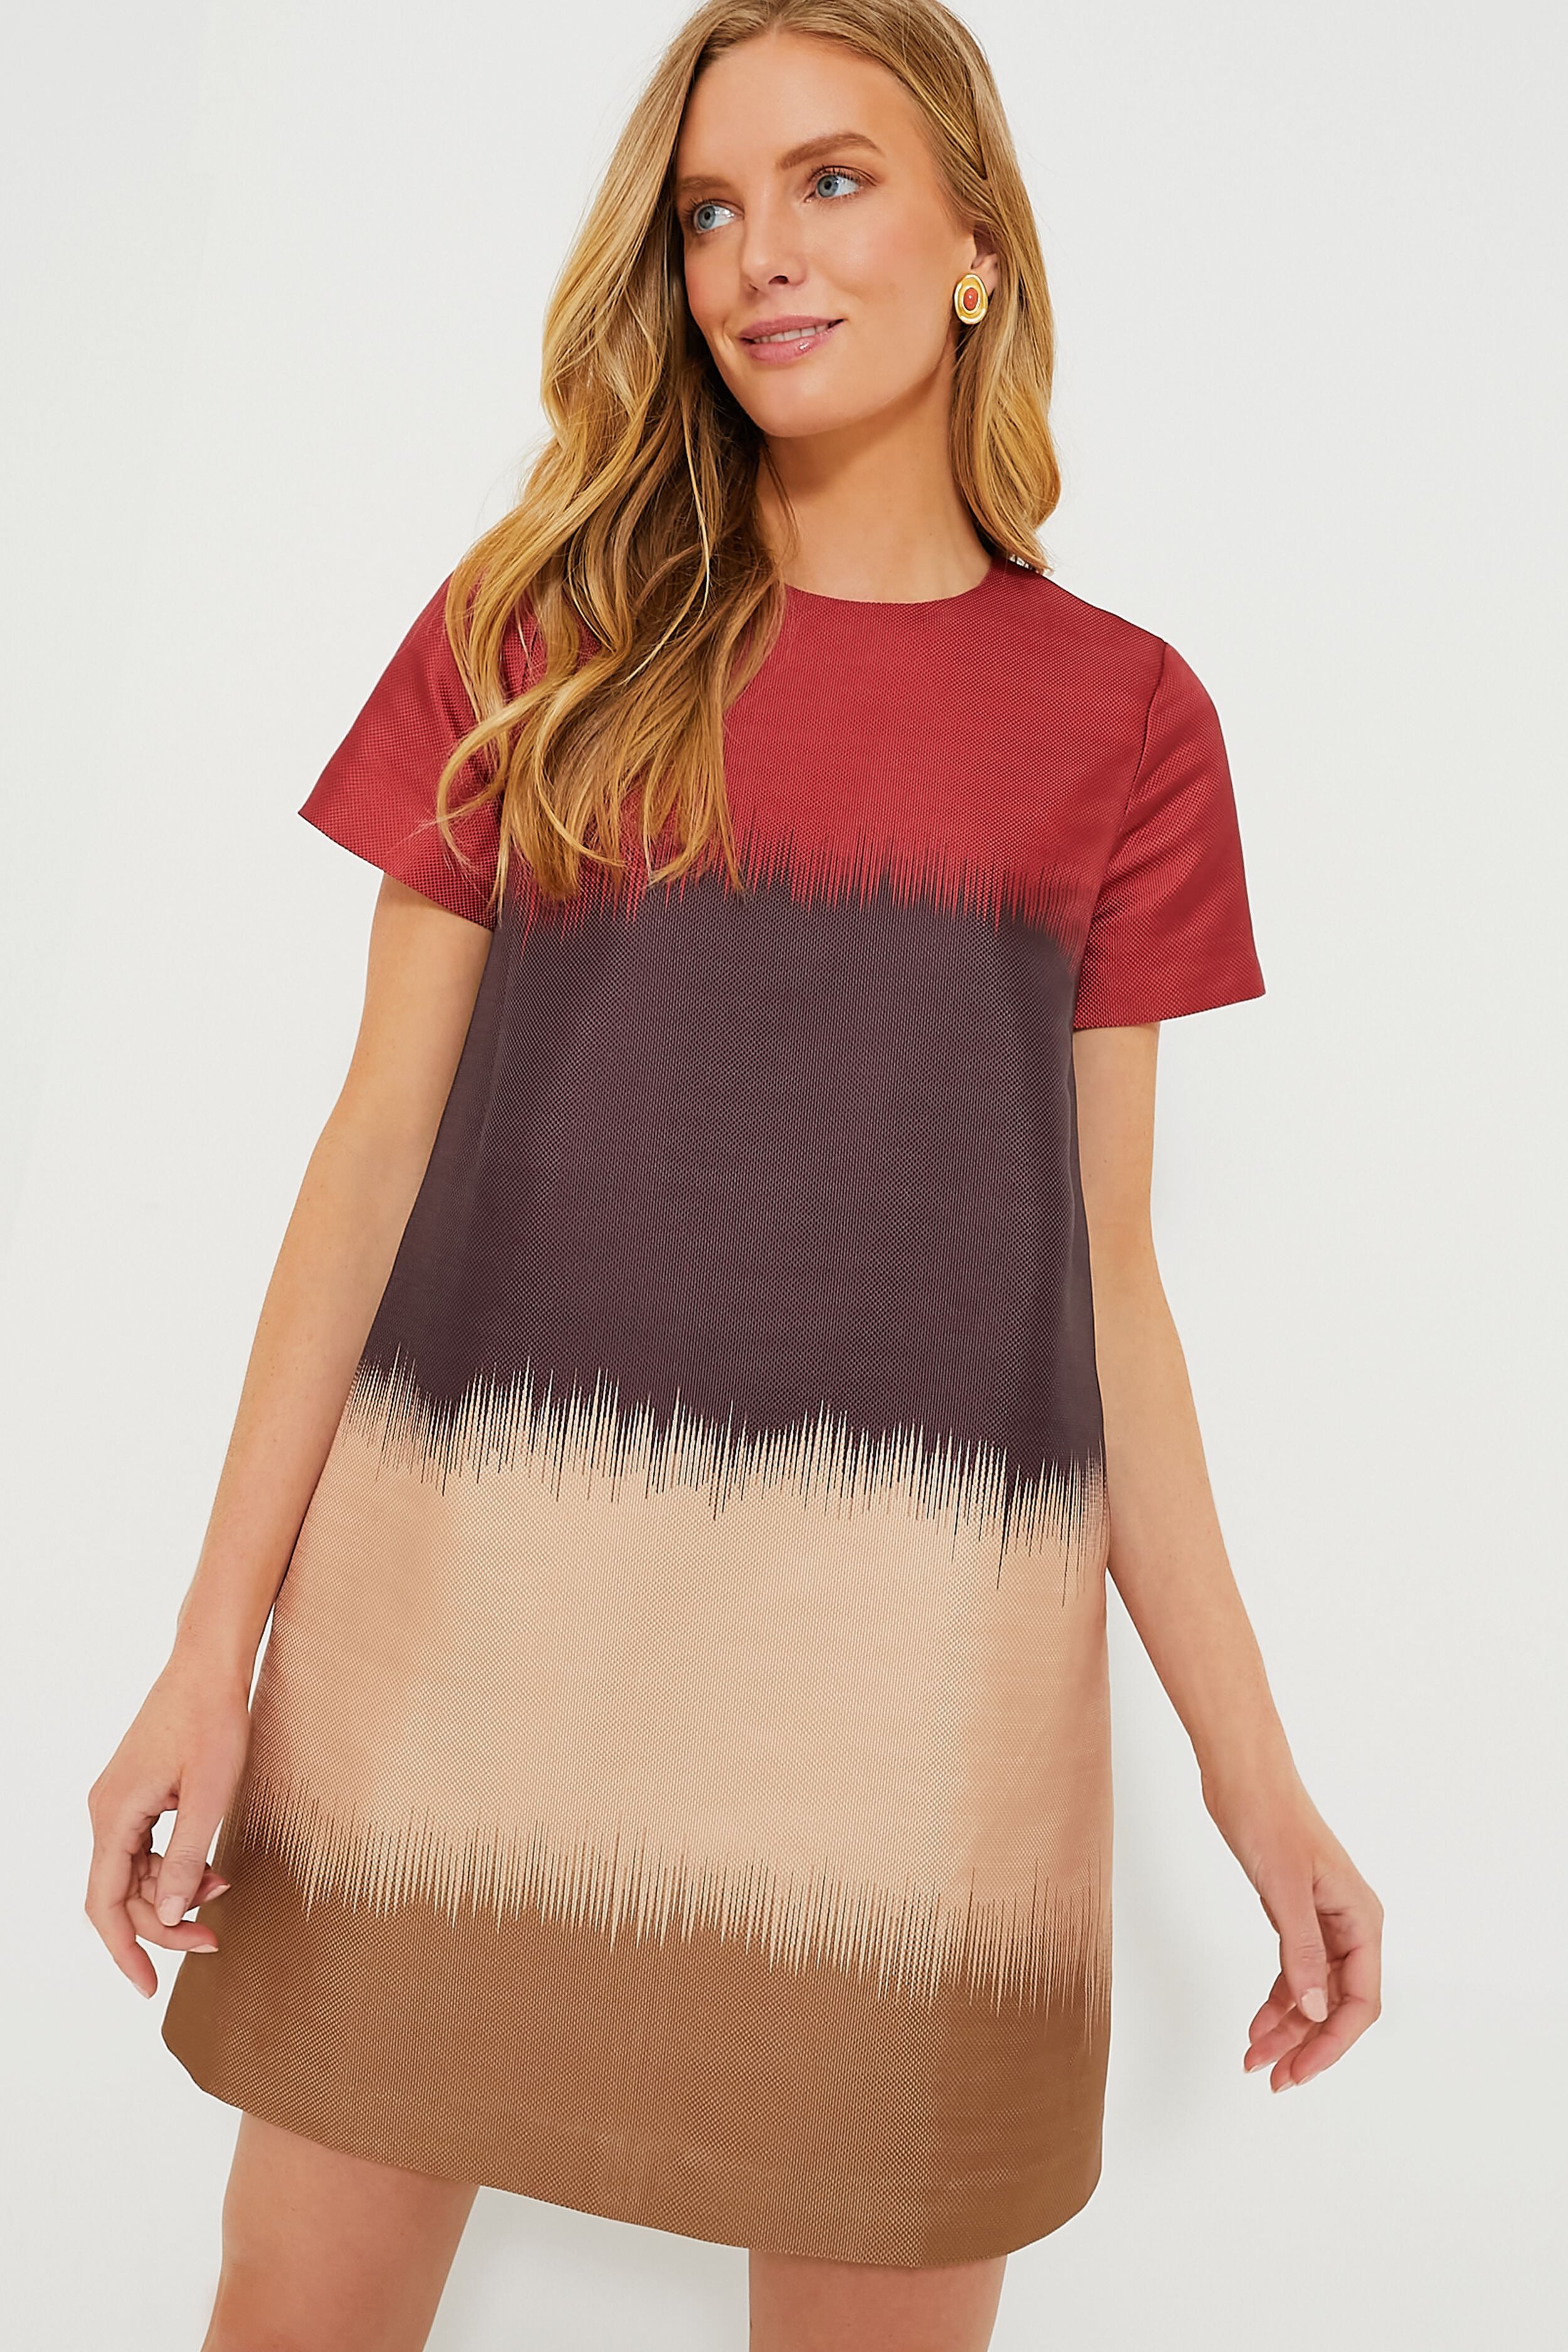 Family Matching Ombre Tie Dye Striped Short-sleeve Dresses and T-shirts Sets